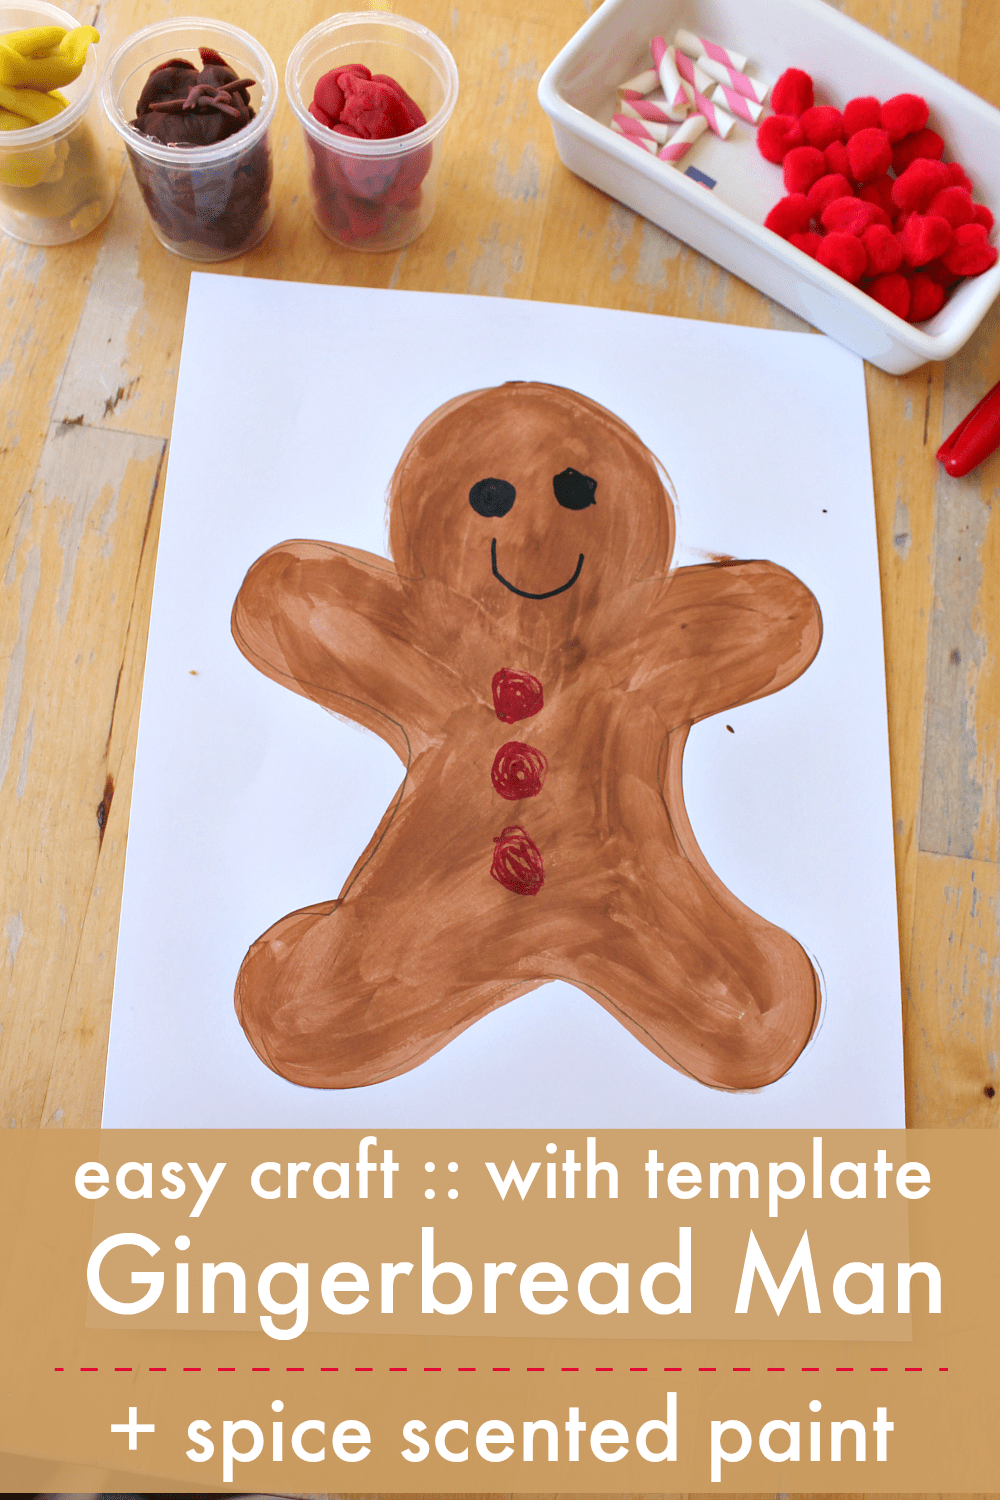 free-gingerbread-printable-holiday-friends-preschool-craft-vlr-eng-br